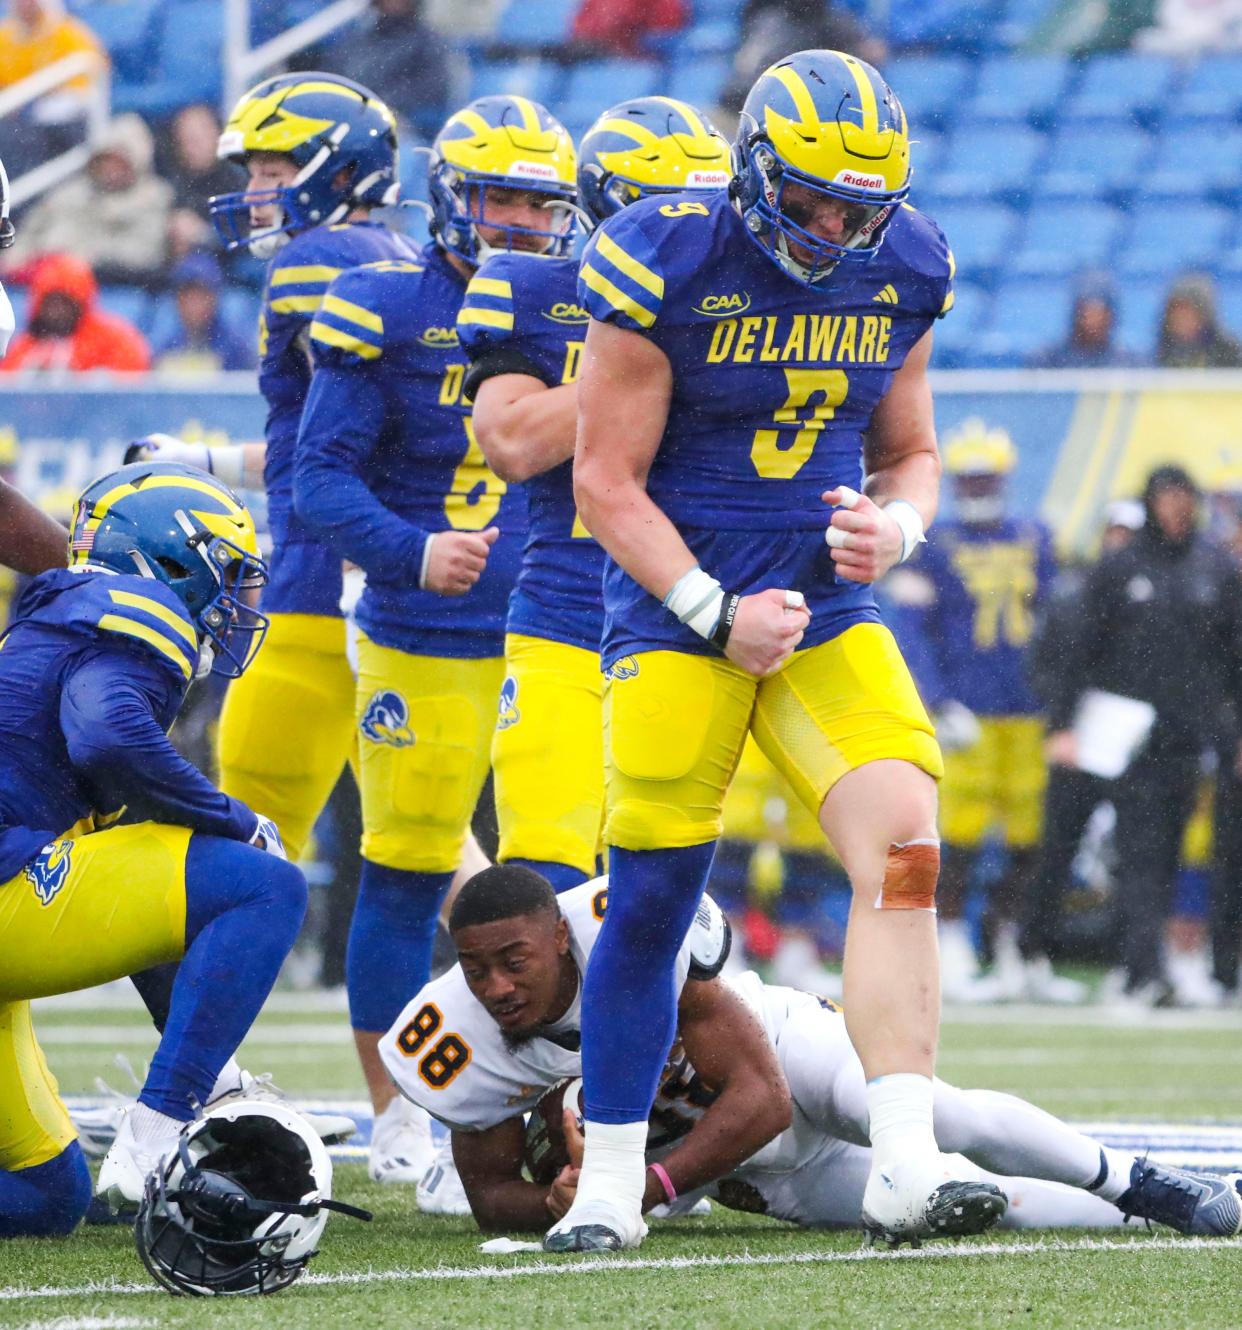 Delaware tight end Braden Brose reacts after helping finish a tackle on North Carolina A&T punt returner Elijah Kennedy (88) in the first quarter at Delaware Stadium, Saturday, Oct. 14, 2023.